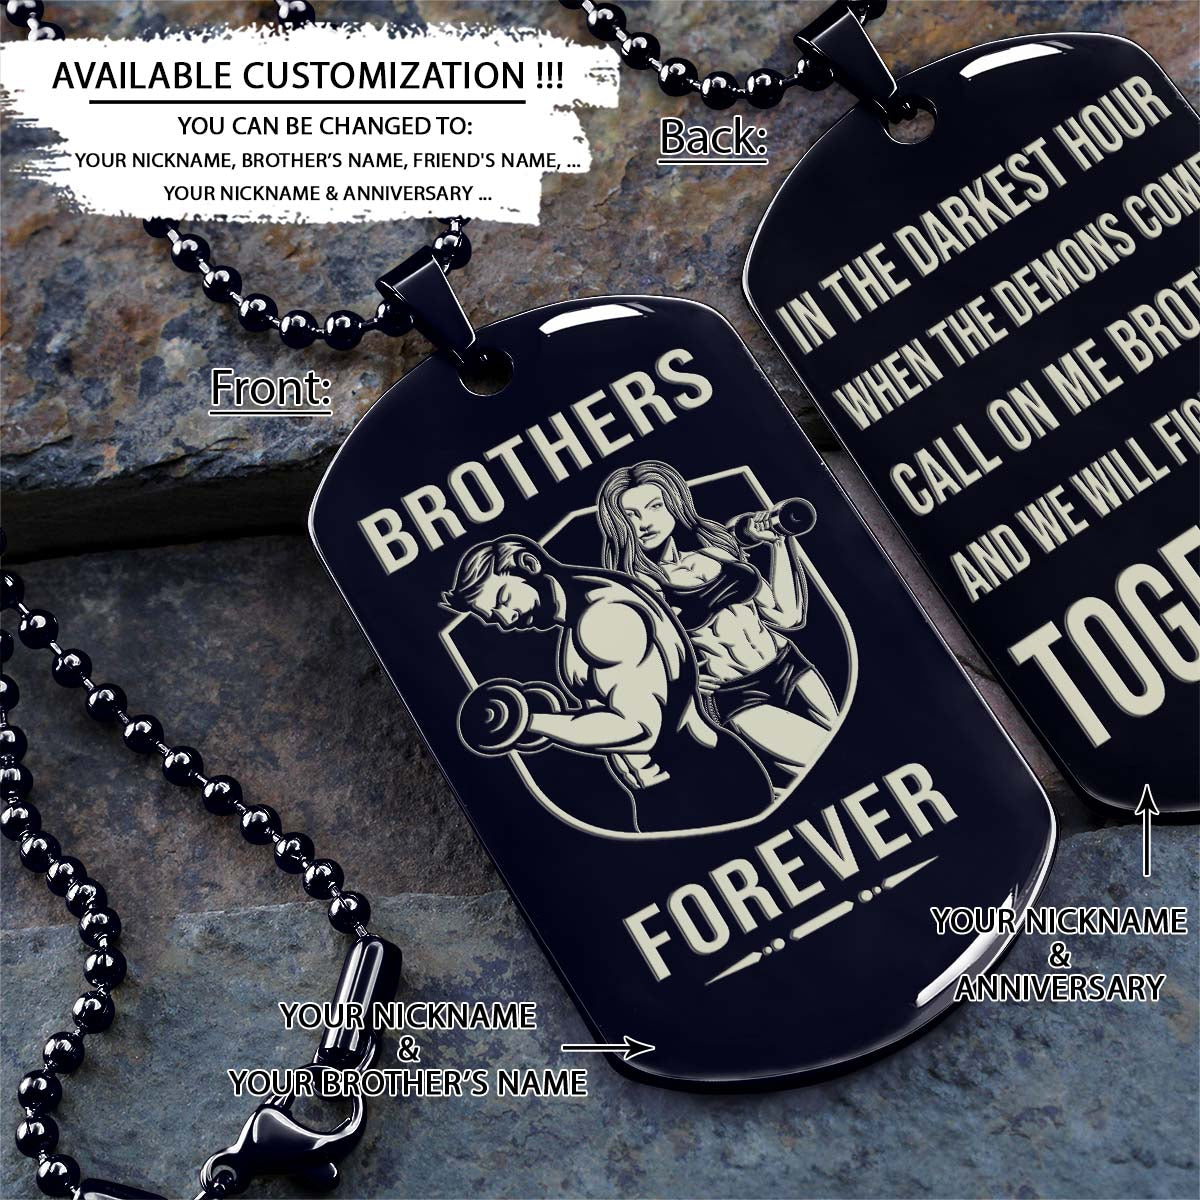 Brothers Forever - It's About Being Better Than You Were The Day Before - Gym - Fitness Center - Workout - Gym Dog Tag - Gym Necklace - Engrave Dog Tag